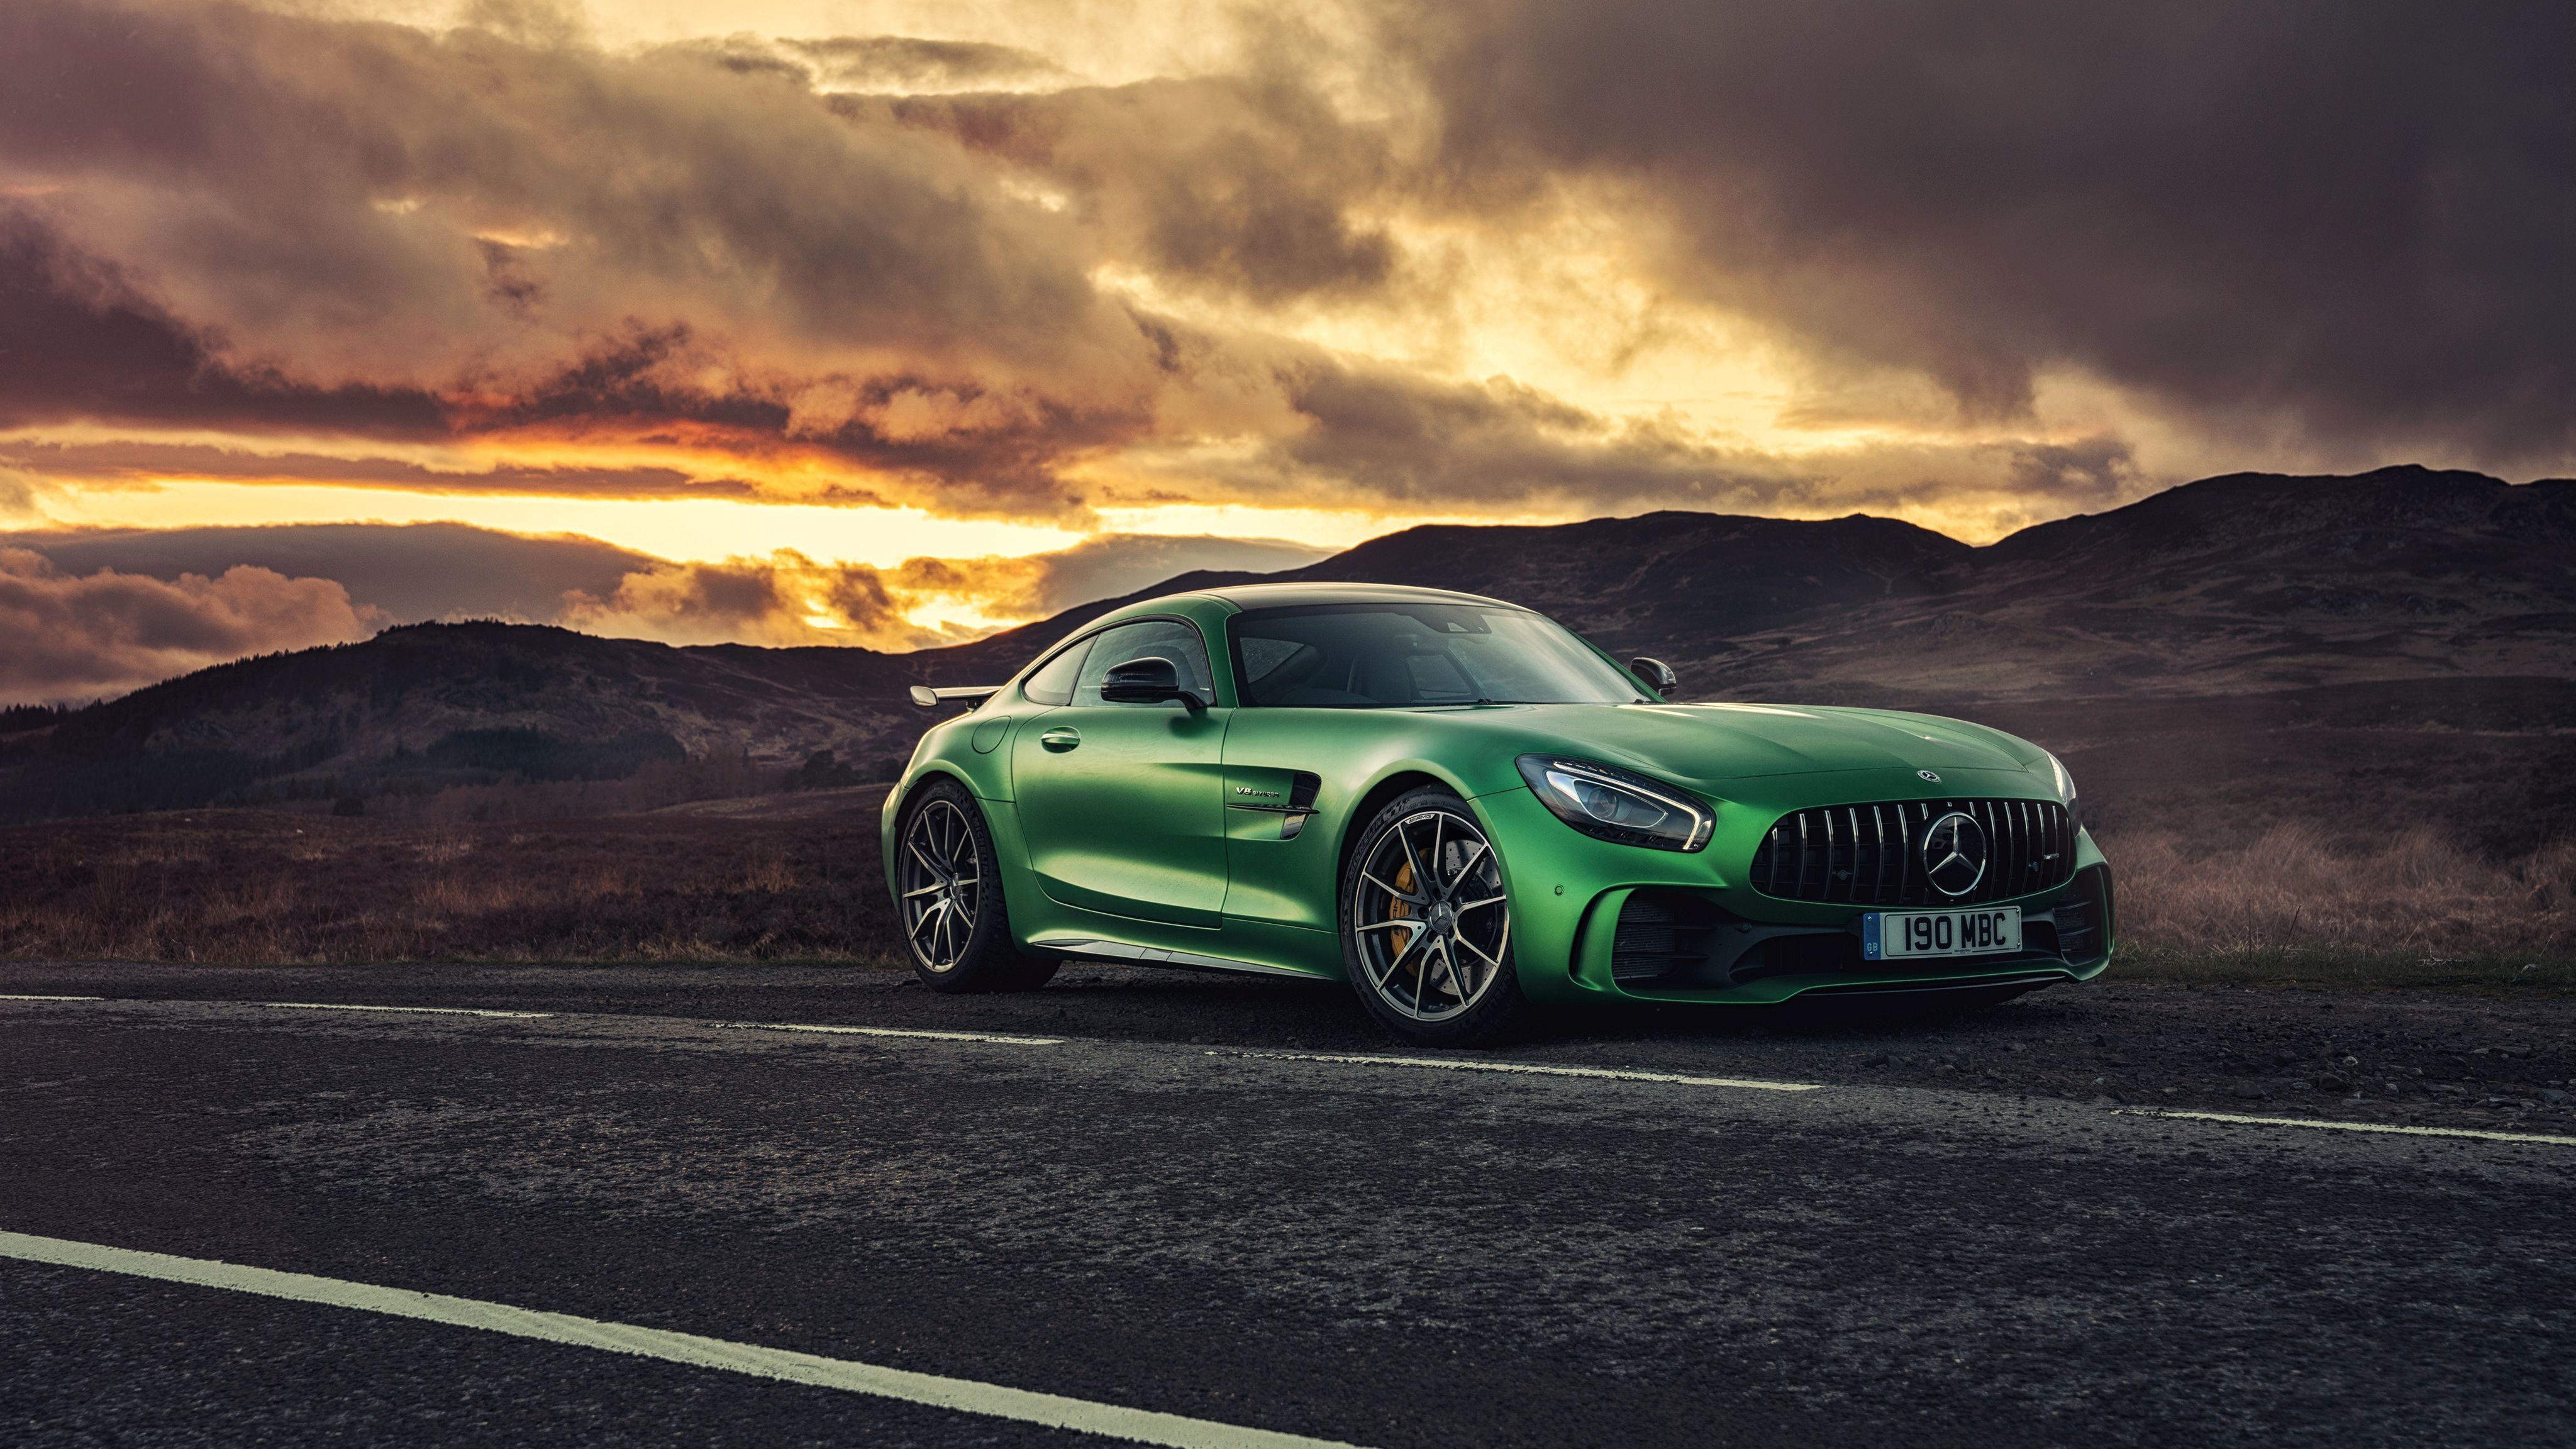 Mercedes Amg Gt R Wallpapers Wallpaper Cave Images, Photos, Reviews